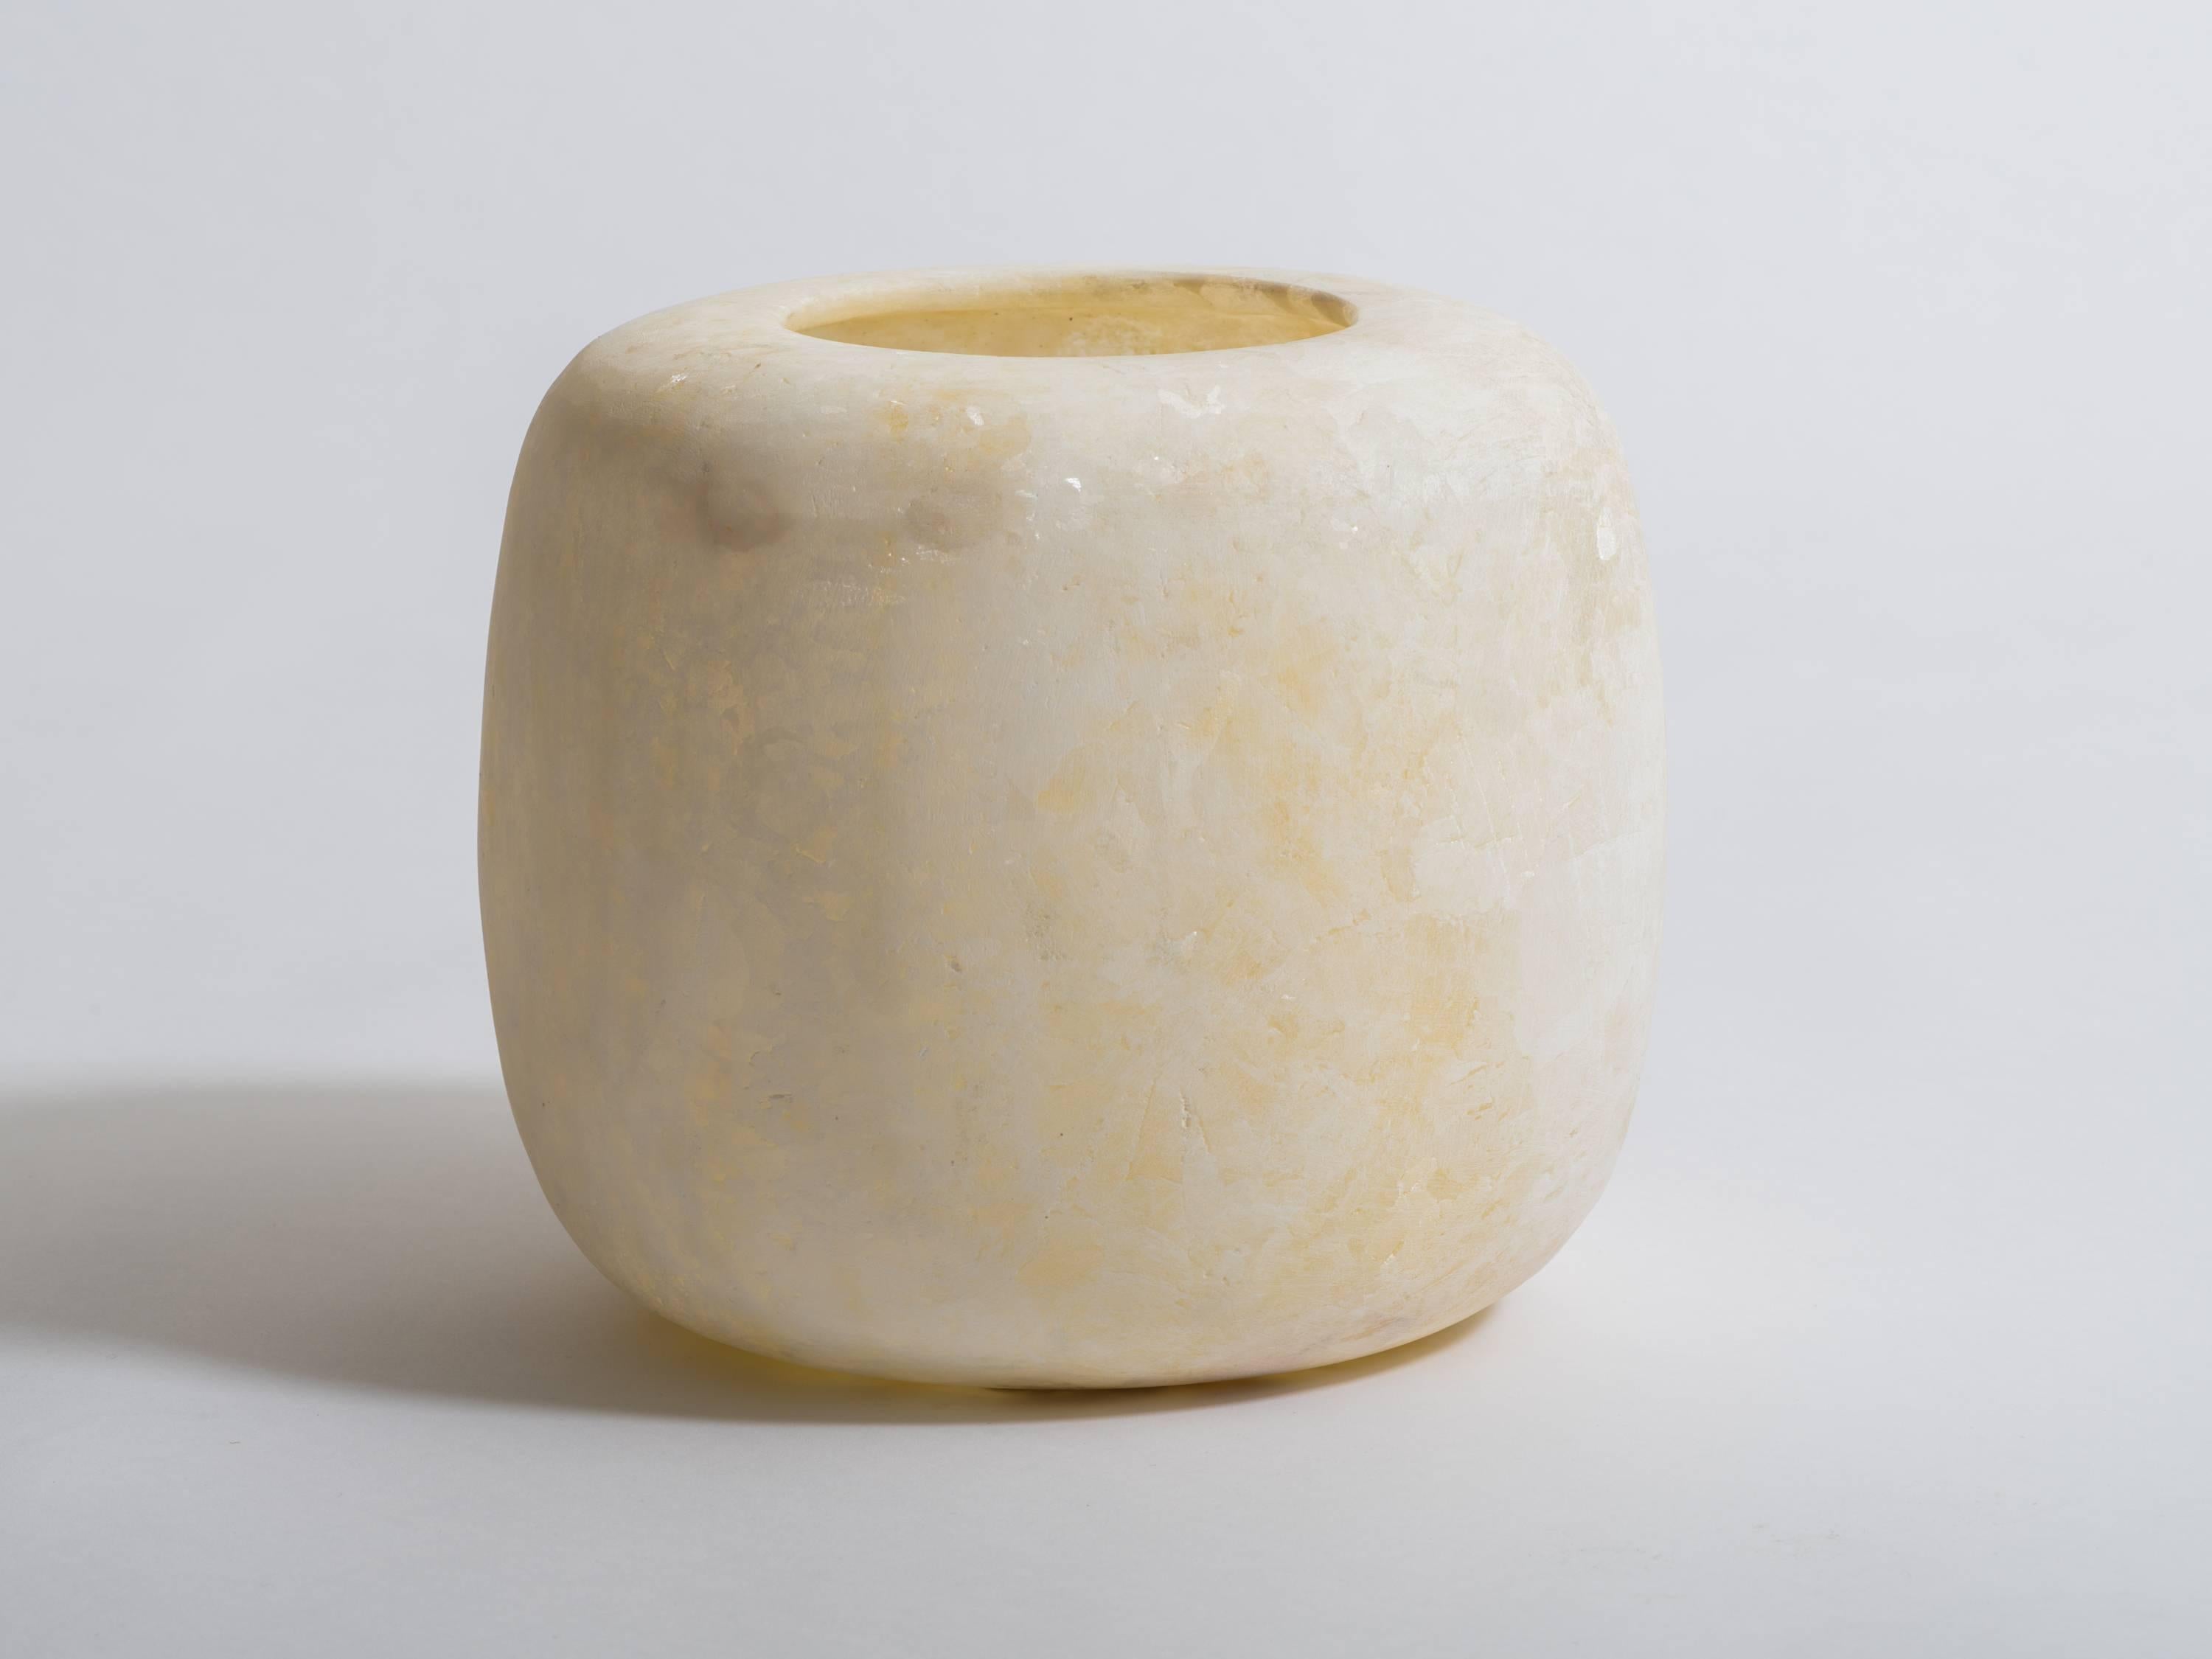 Hand-carved Egyptian alabaster jardiniere vase with flat bottom.